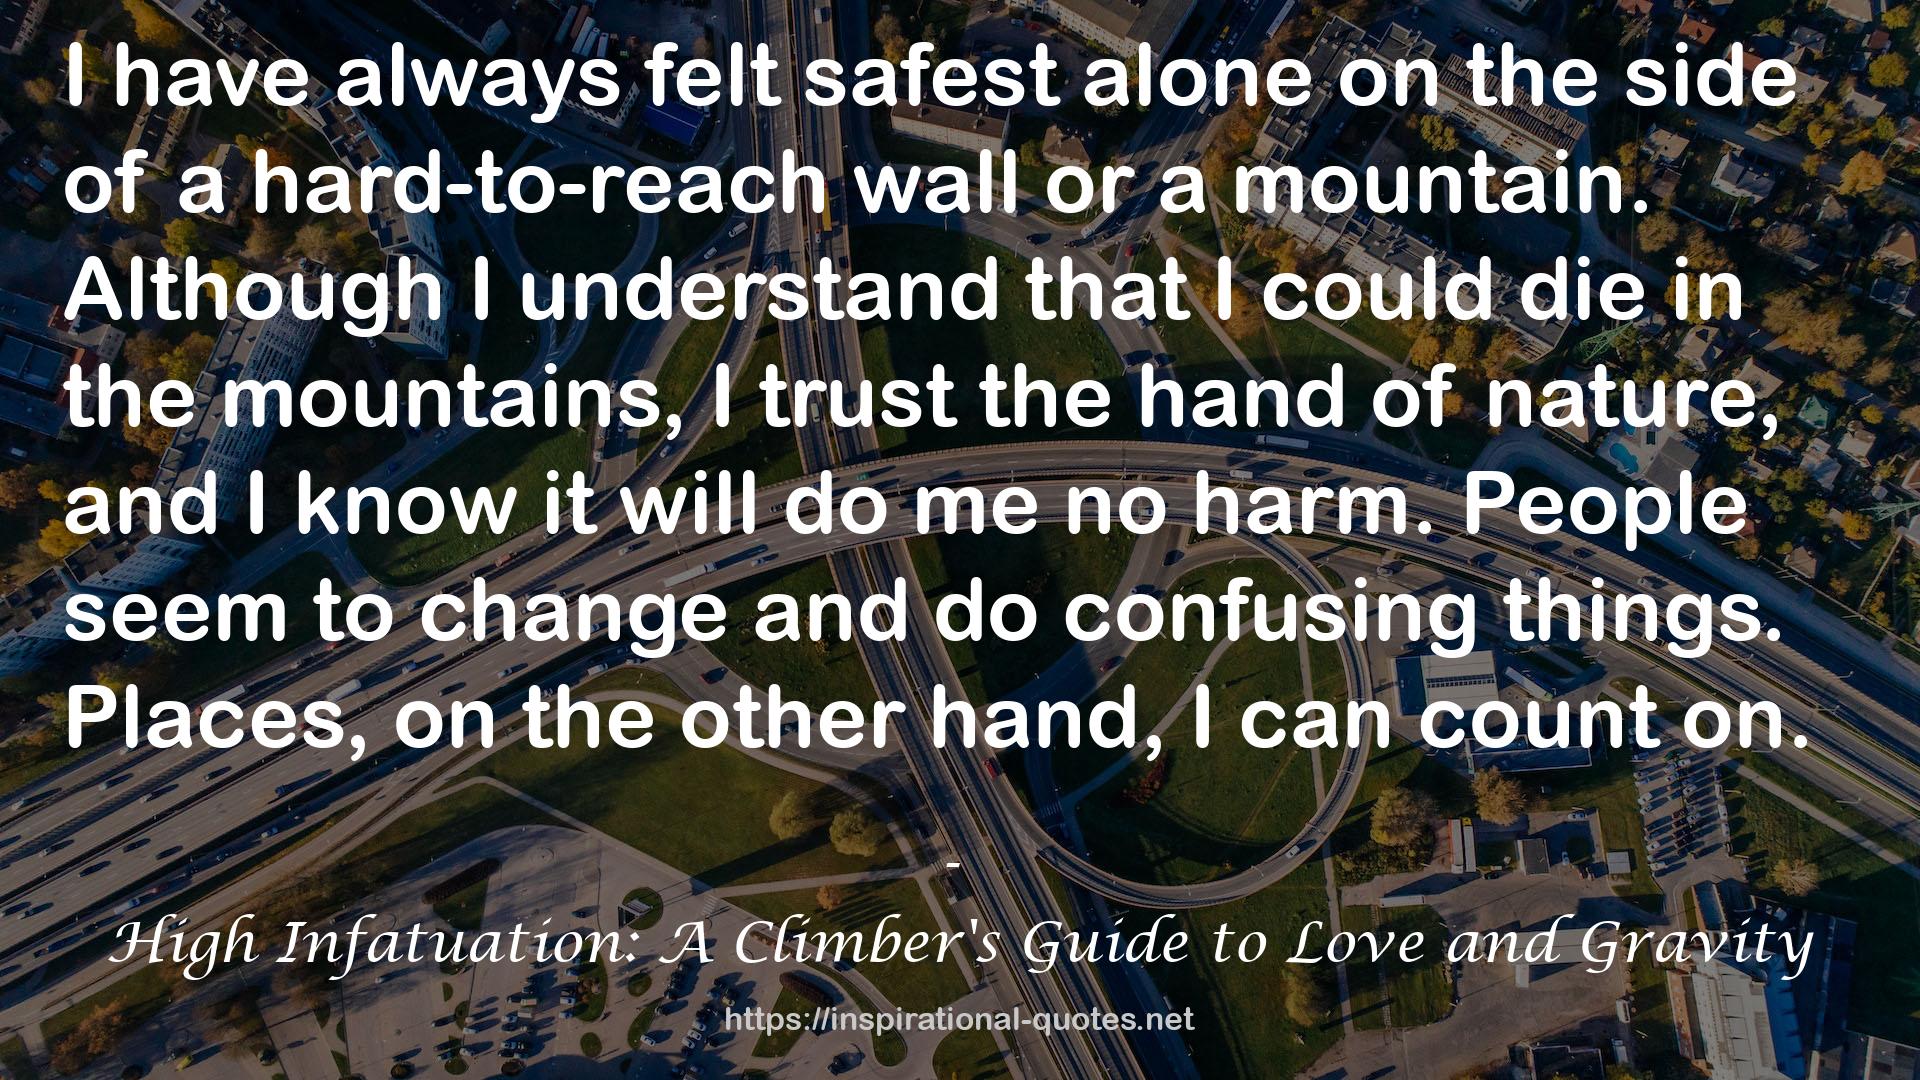 High Infatuation: A Climber's Guide to Love and Gravity QUOTES